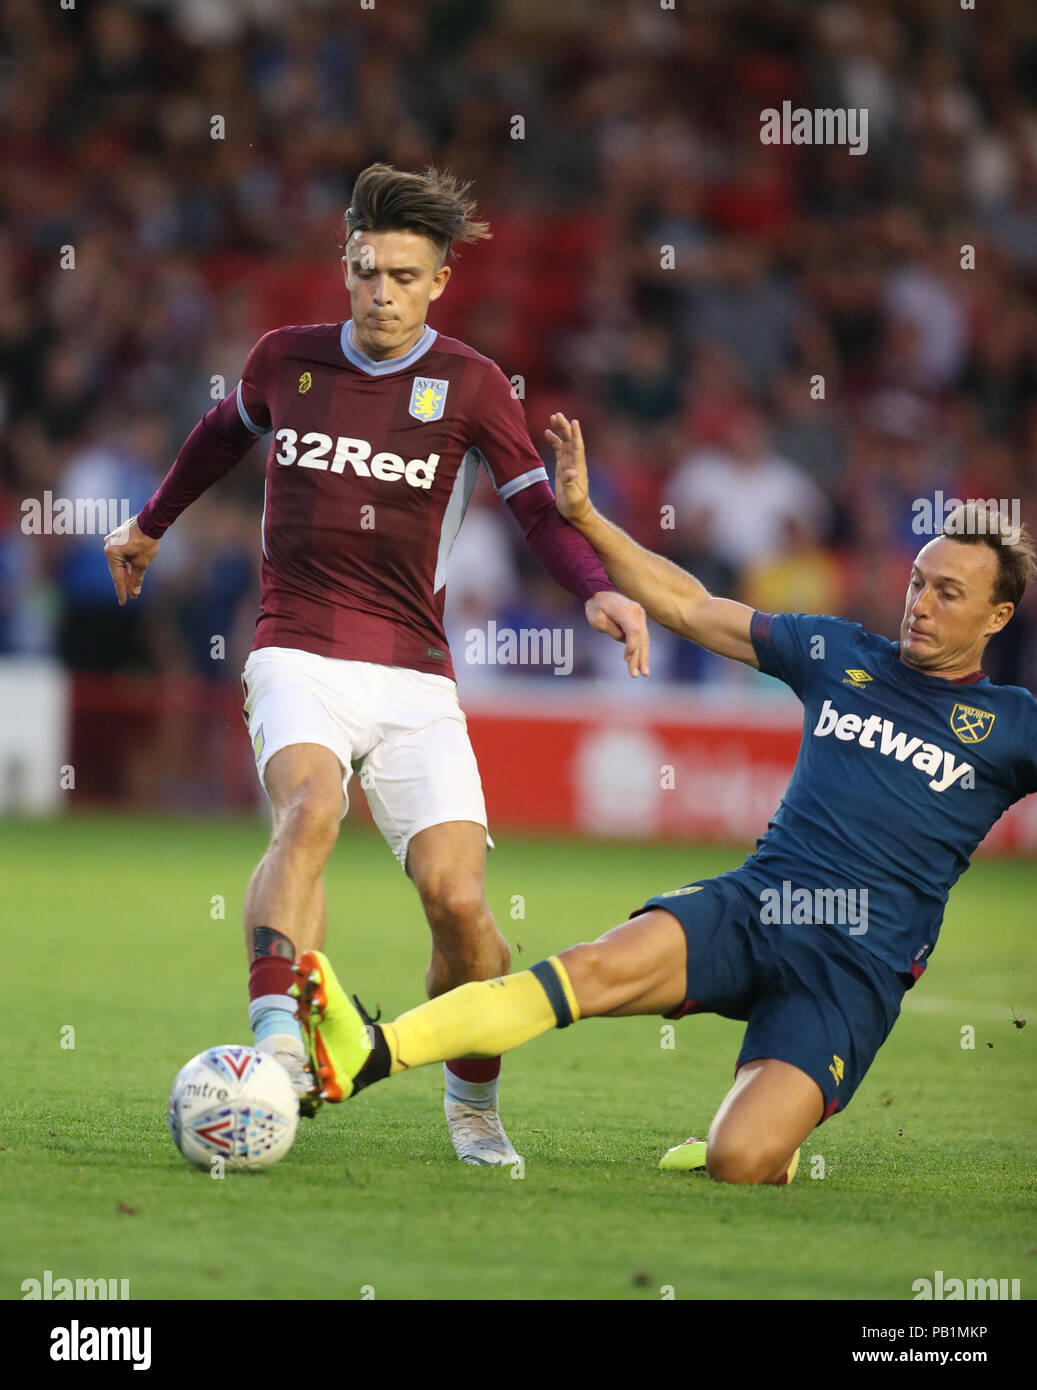 Aston Villa's Jack Grealish and West Ham's Mark Noble during a pre season friendly match at Villa Park, Birmingham. PRESS ASSOCIATION Photo. Picture date: Wednesday July 25, 2018. Photo credit should read: David Davies/PA Wire. No use with unauthorised audio, video, data, fixture lists, club/league logos or 'live' services. Online in-match use limited to 75 images, no video emulation. No use in betting, games or single club/league/player publications. Stock Photo